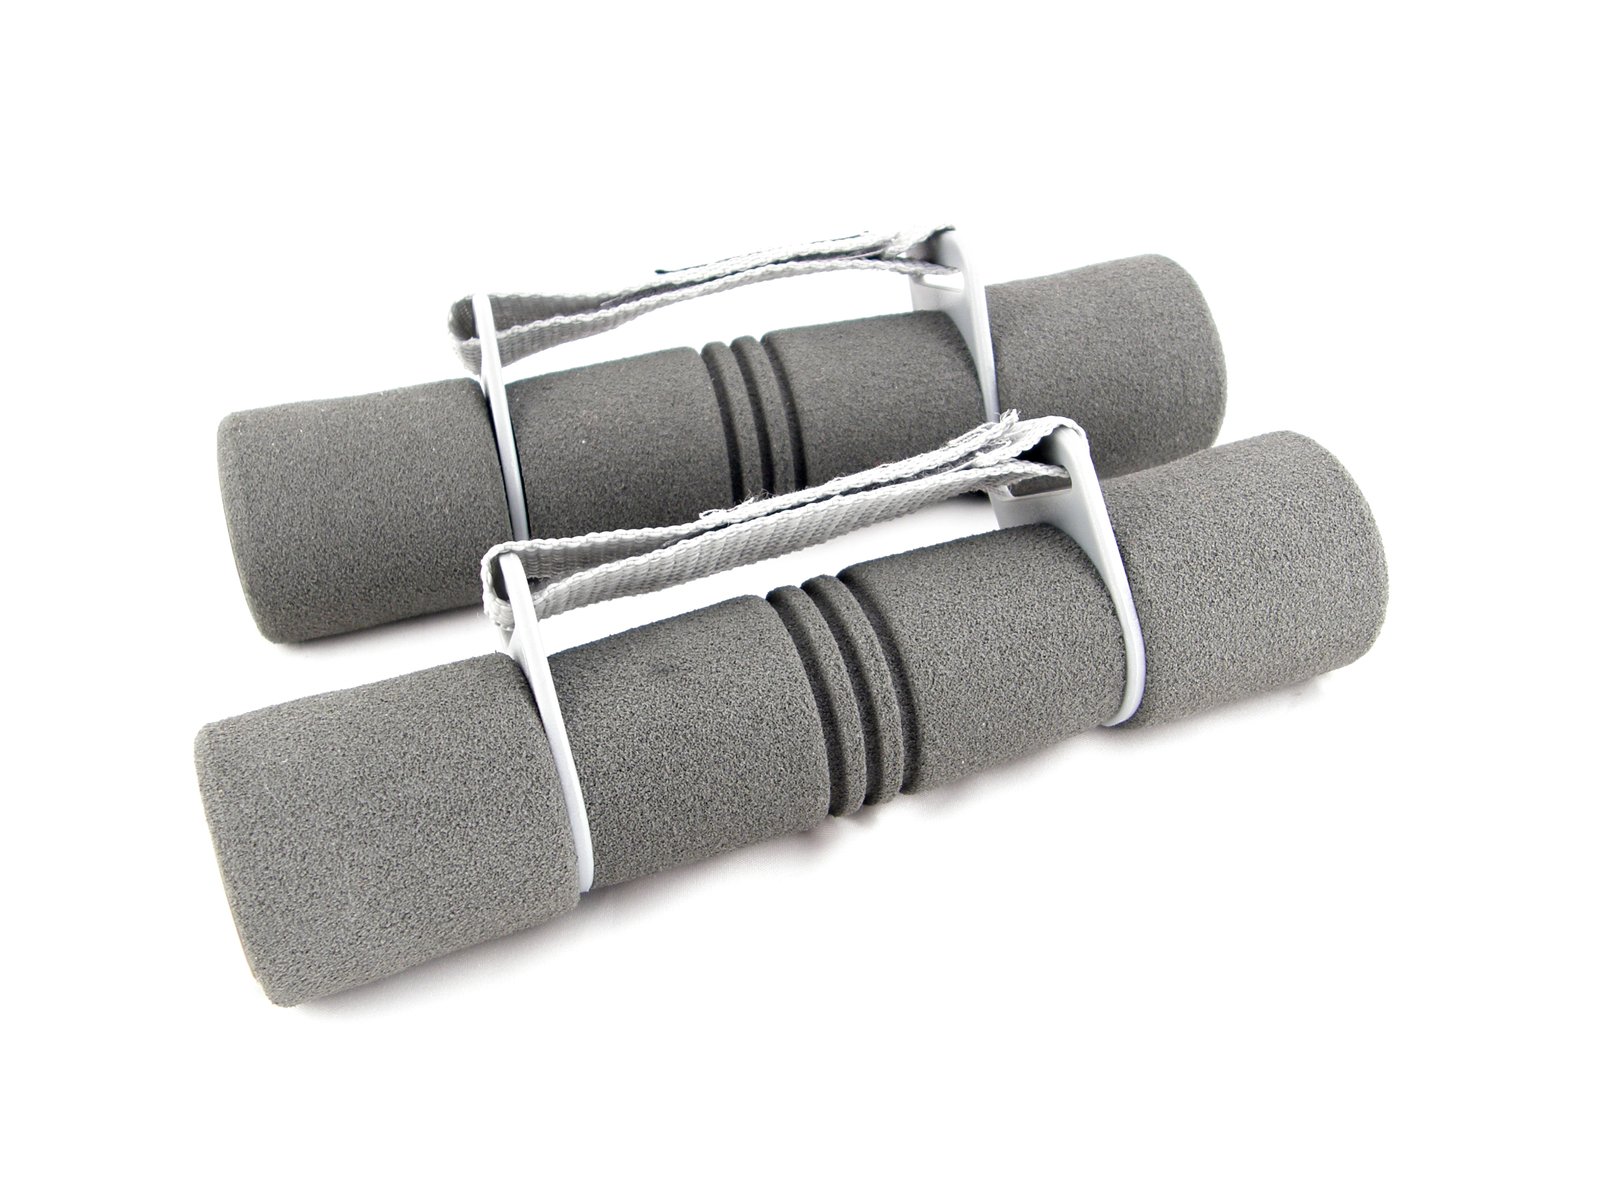 the two yoga mat set is black with grey stripes